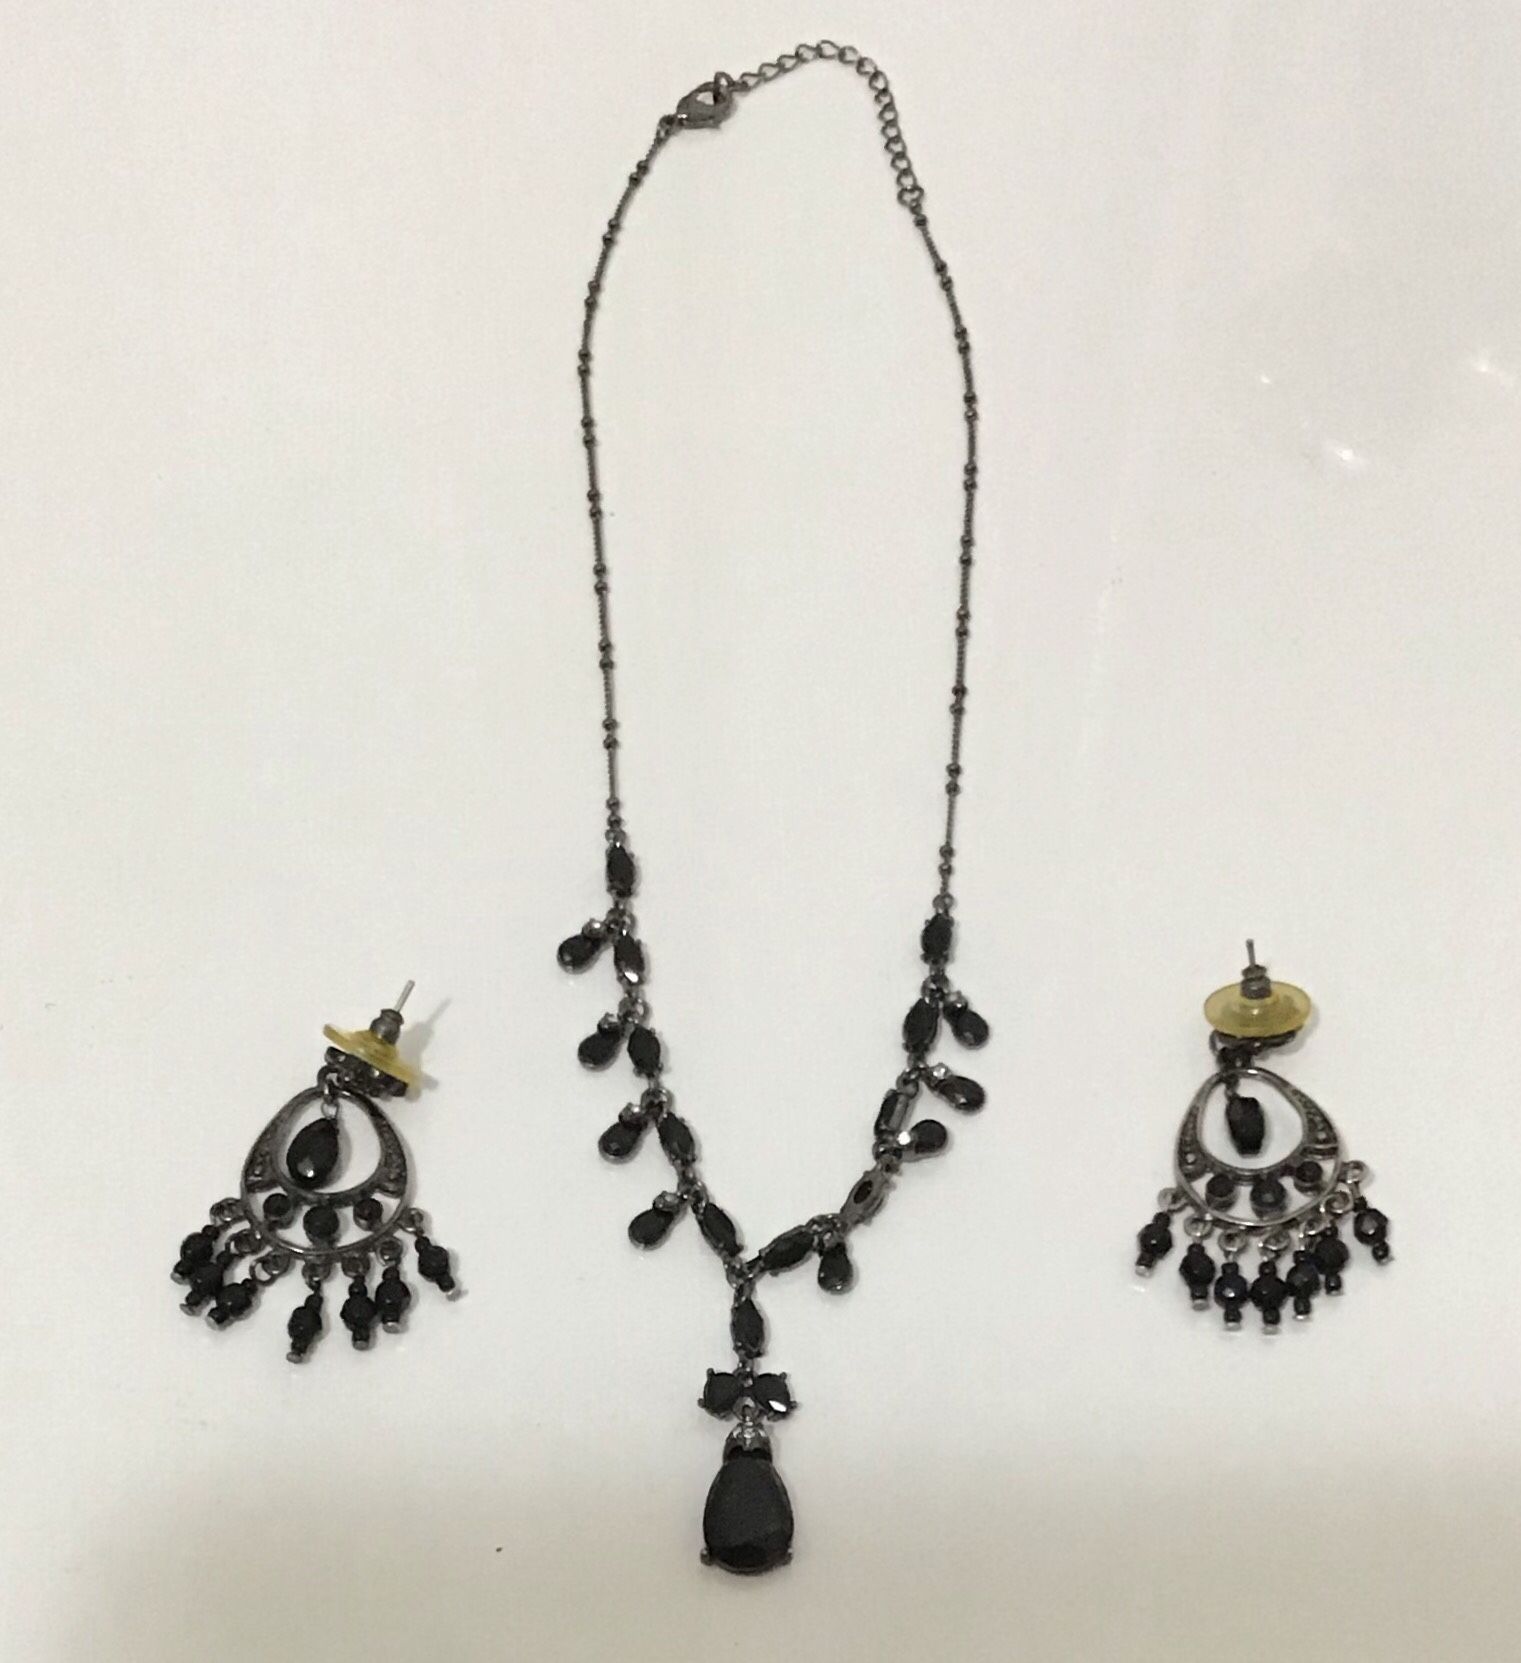 Vintage 1980’s Black & Silver Necklace with Matching Earrings 